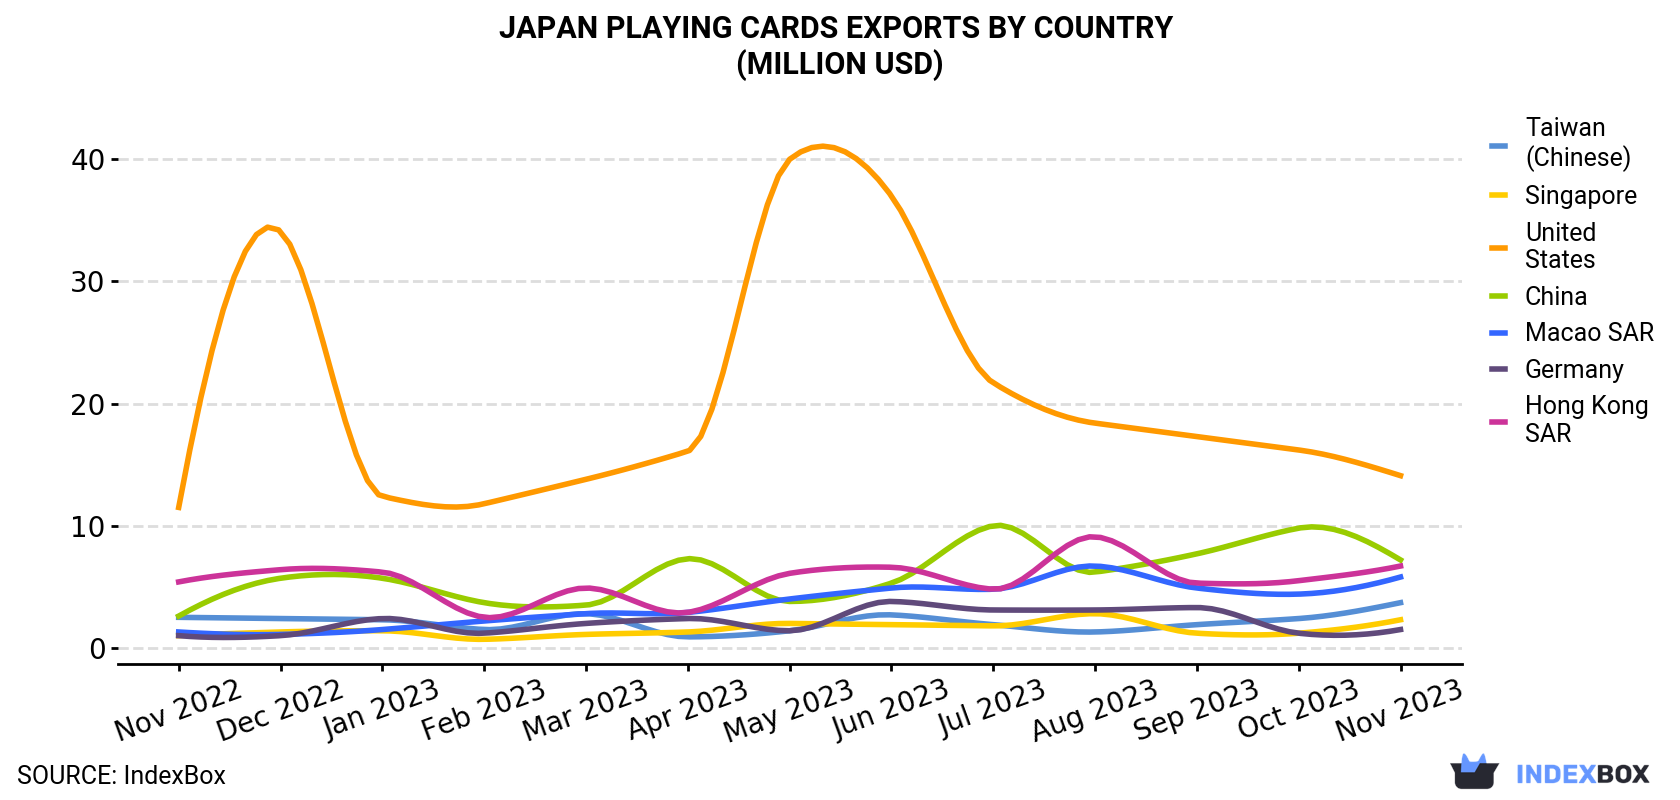 Japan Playing Cards Exports By Country (Million USD)